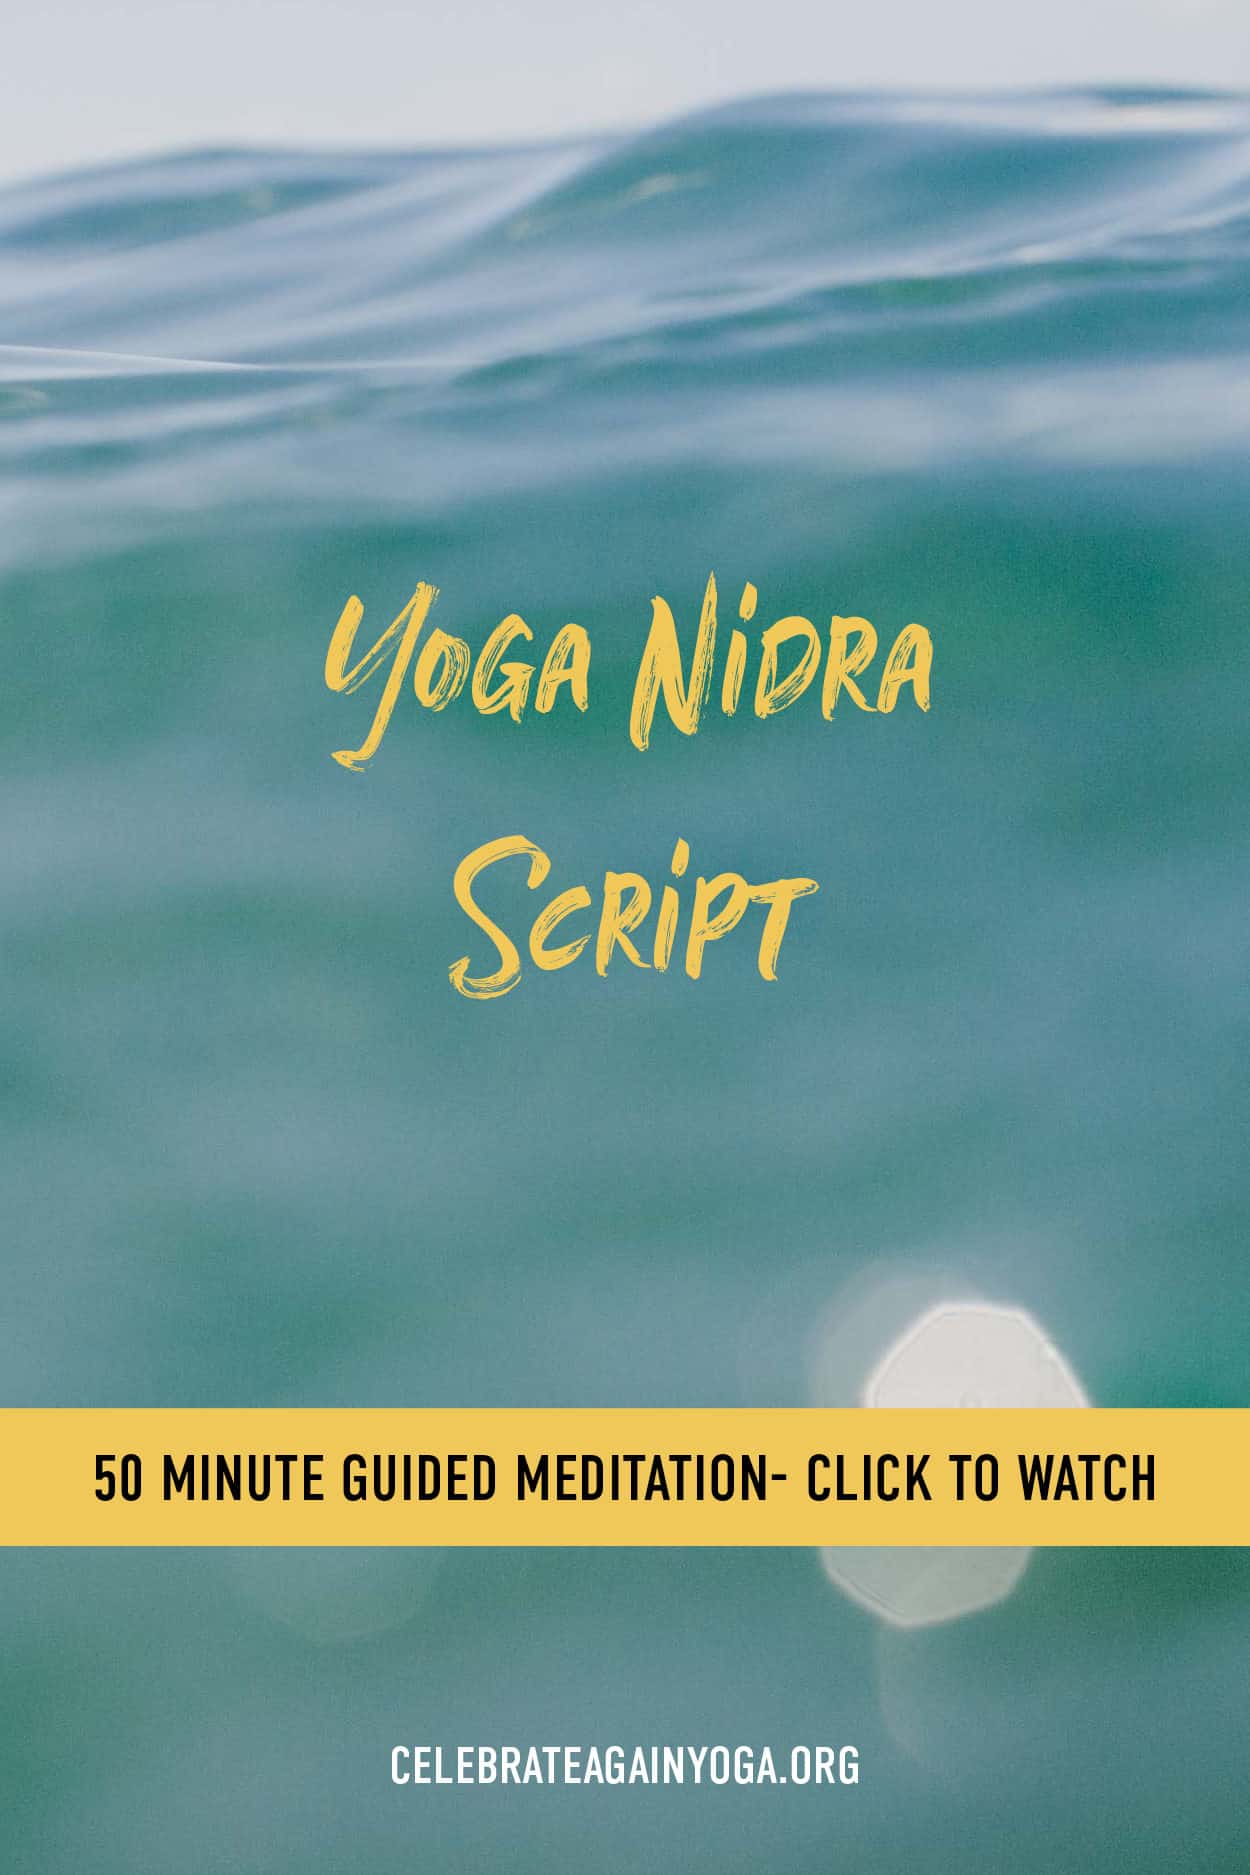 "yoga nidra script 50 minute guided meditation click to watch" view of ocean water